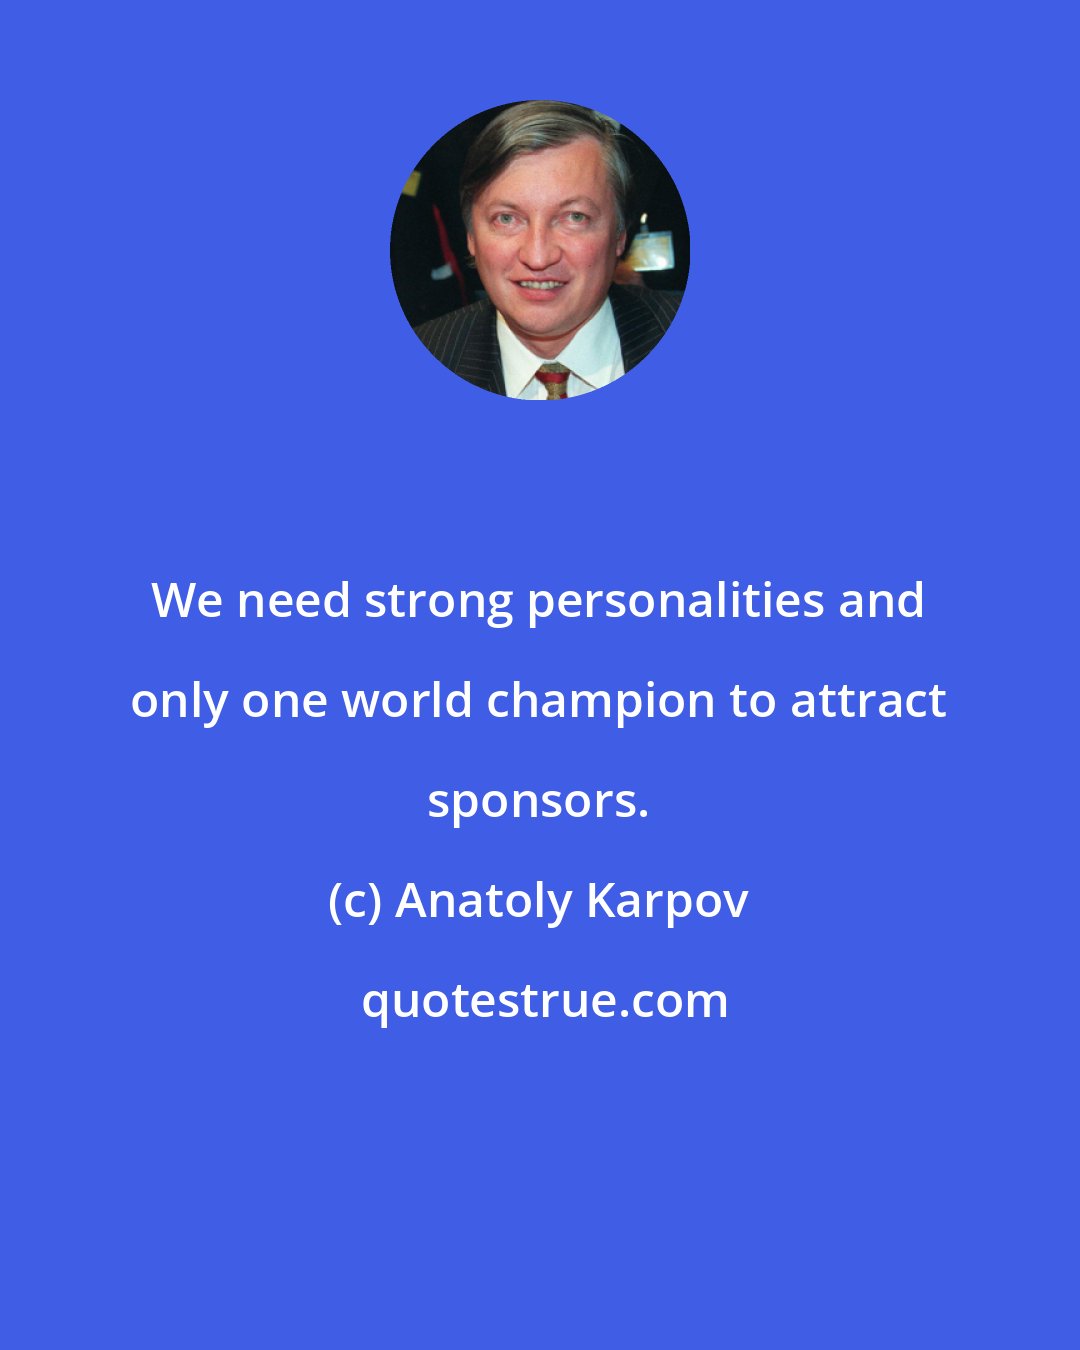 Anatoly Karpov: We need strong personalities and only one world champion to attract sponsors.